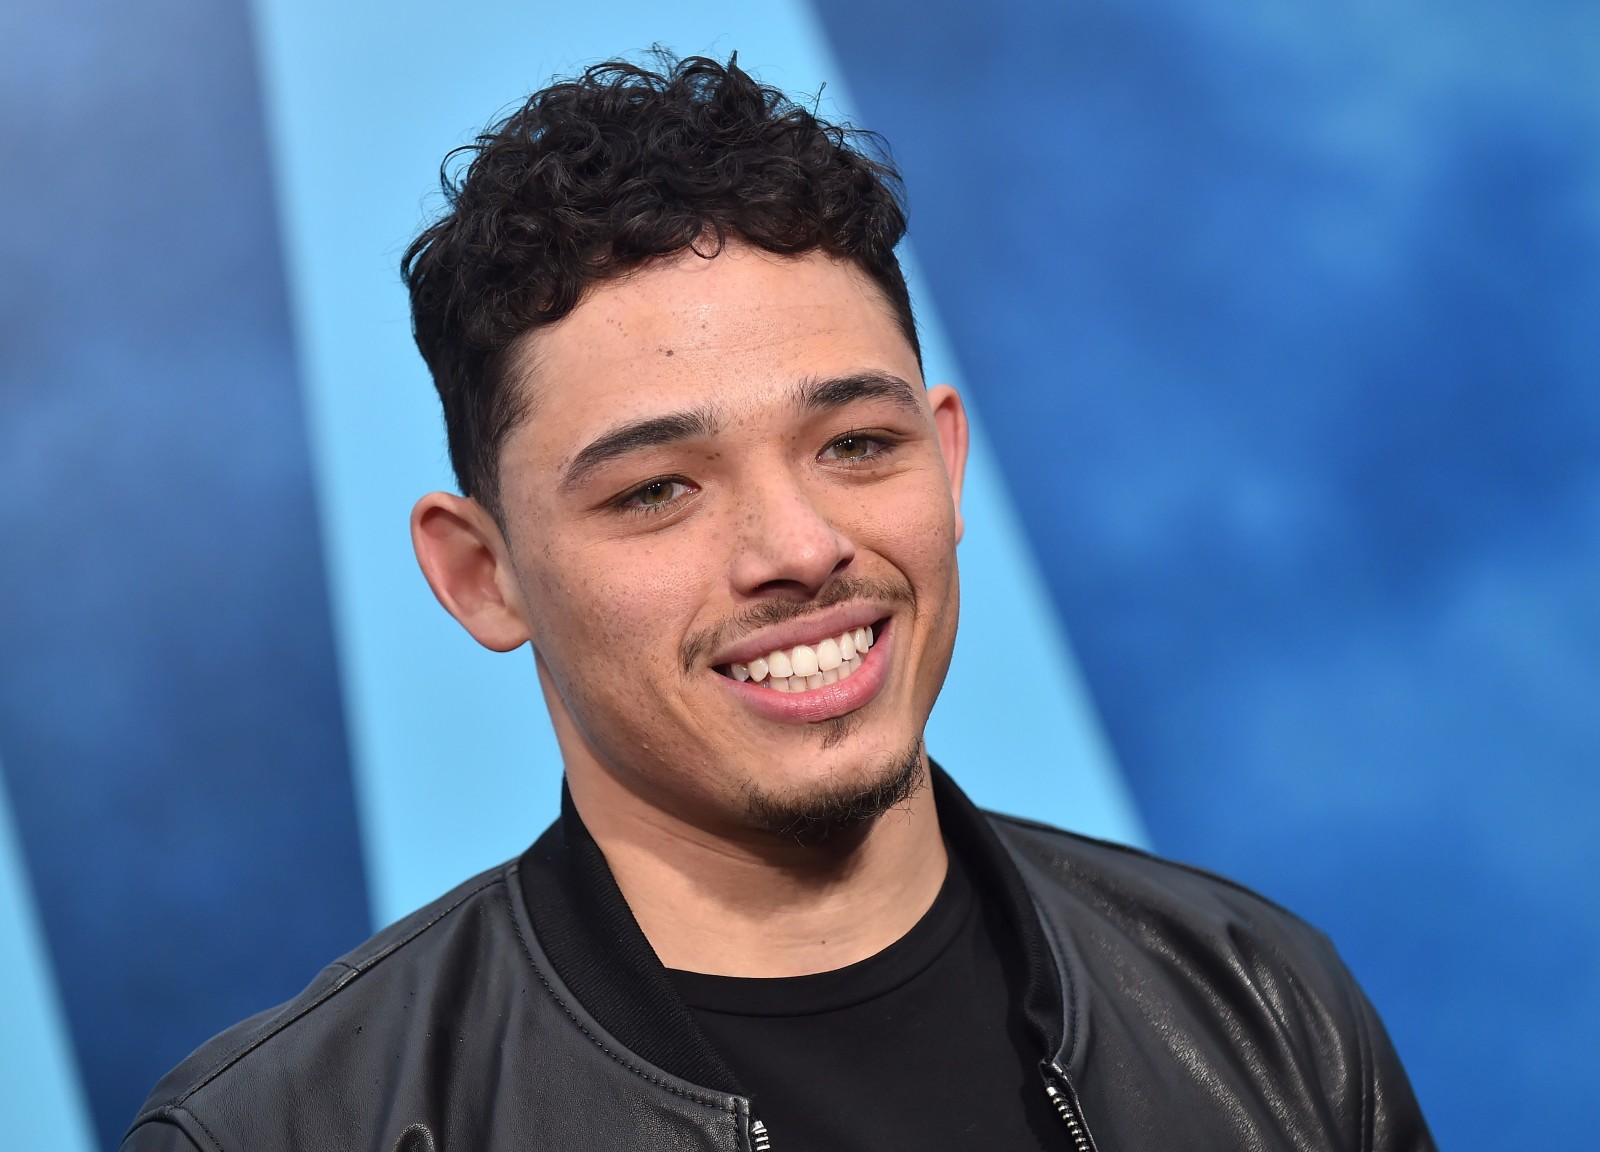 Transformers News: Transformers 2022 Movie Reportedly In Final Negotiations To Cast Hamilton Star Anthony Ramos As Lead